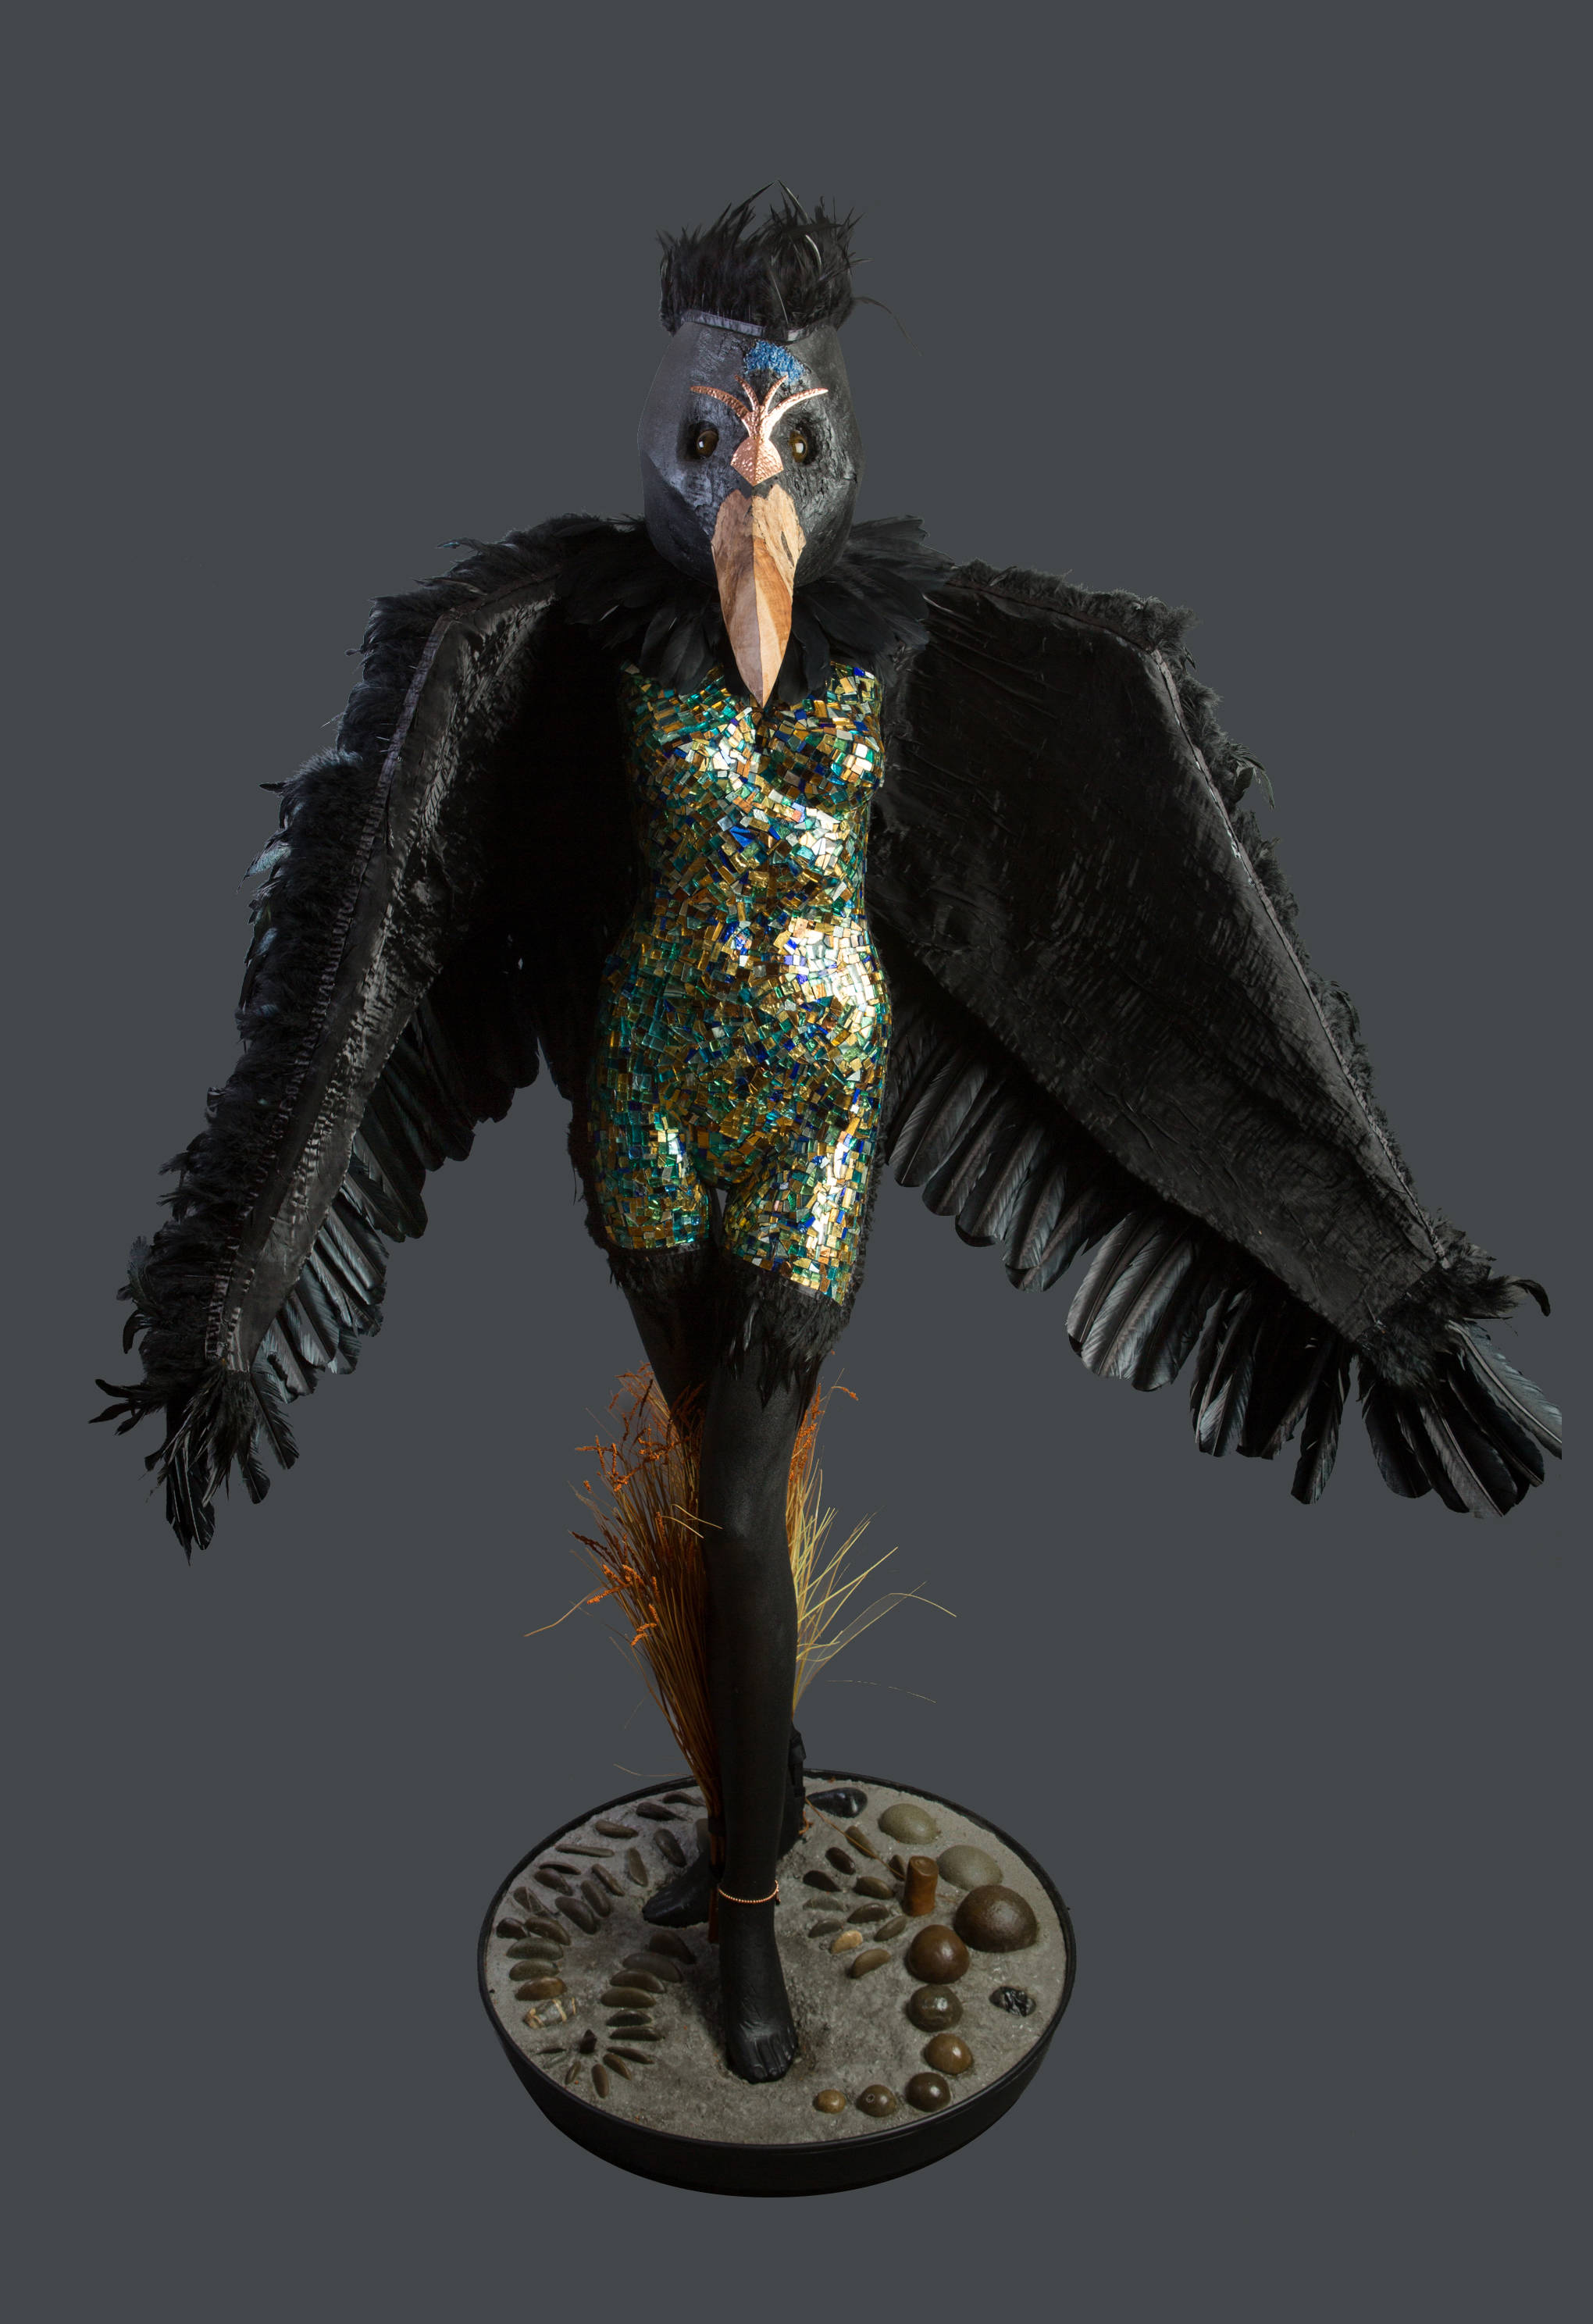 The Art Jam 2017 art show and sale will feature a contributing mixed-media piece called “Our Raven,” a 6-foot-tall mannequin woman with a mosaic body, carved raven head and feathers. This piece was inspired by a friend of artists involved in Art Jam who died last year after battling cancer.